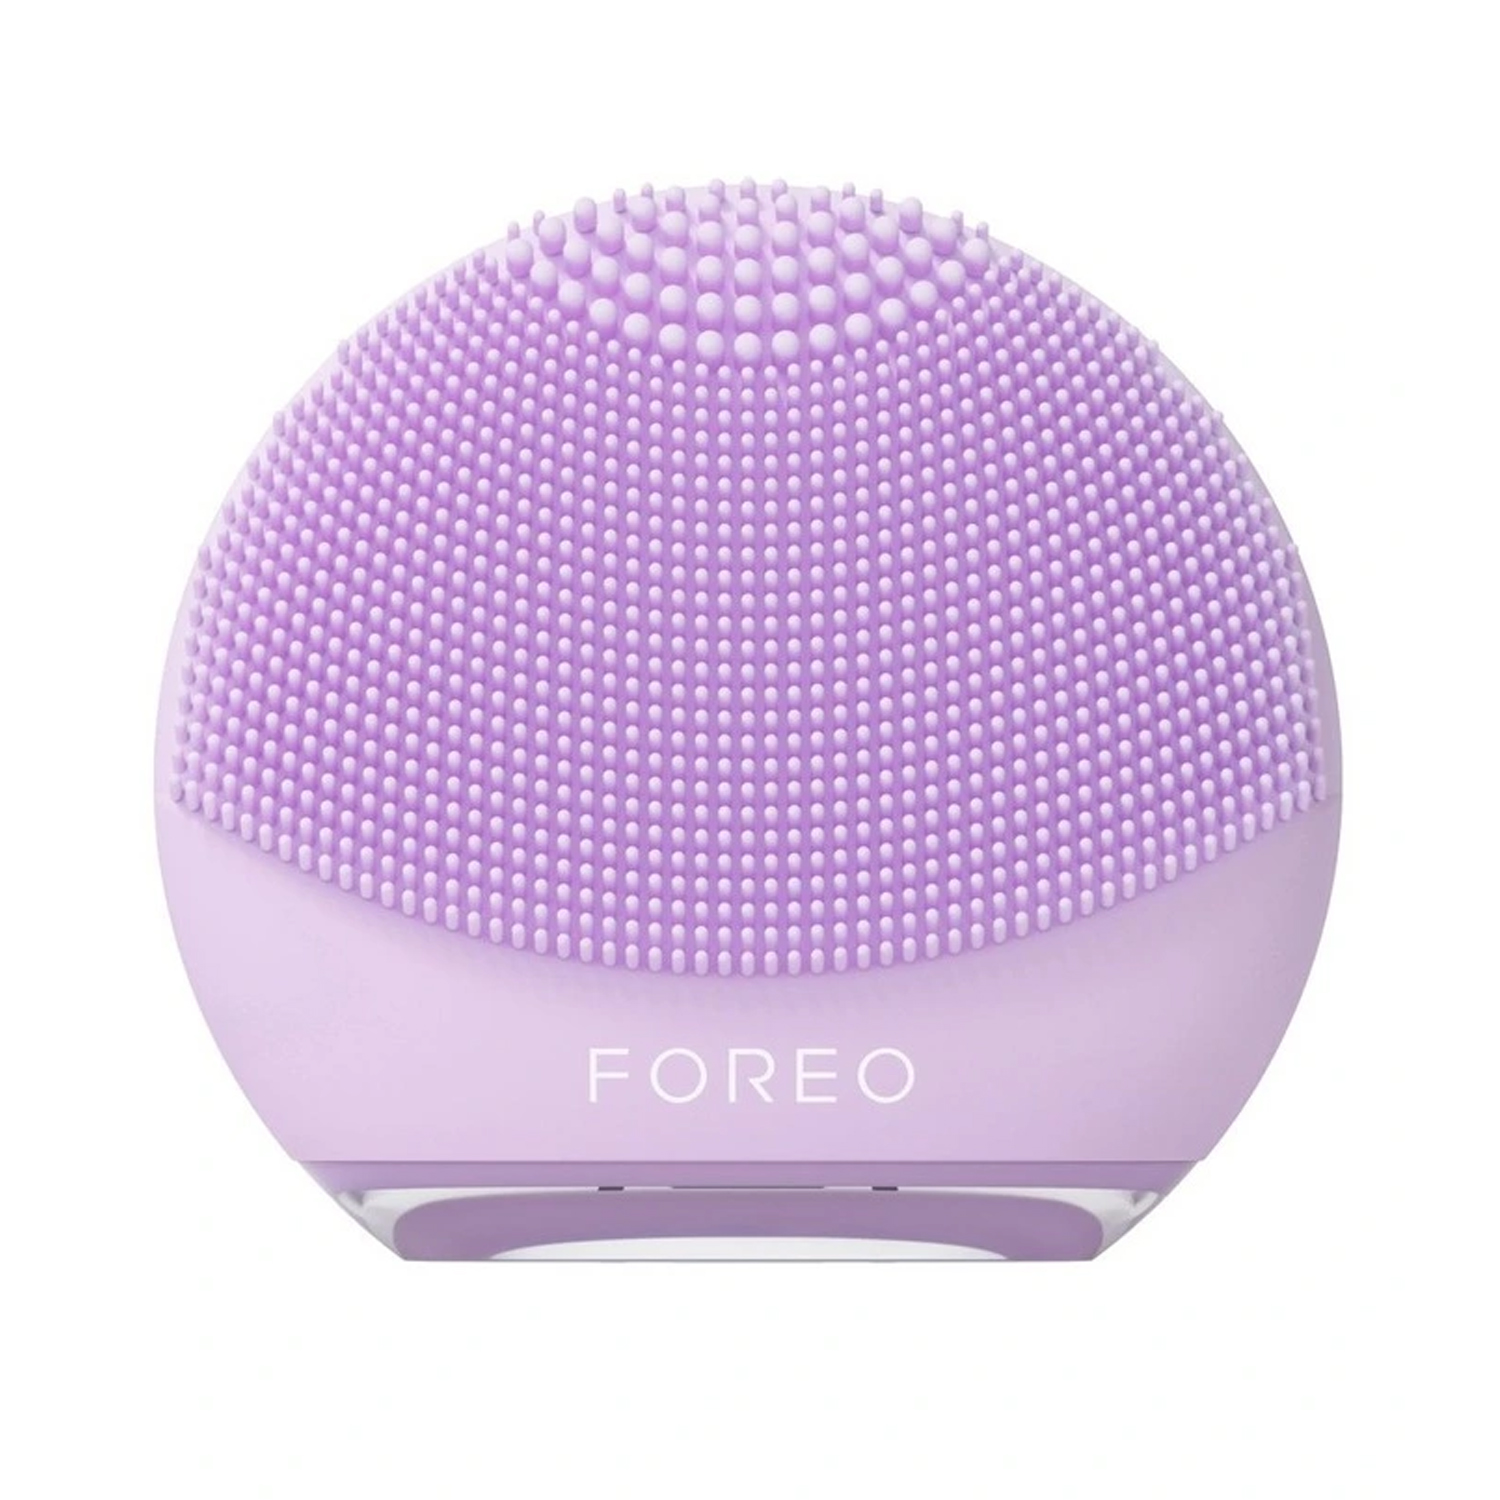 cleansing skin care Foreo LUNA 4 Go Facial Cleansing & Firming Device - Lavender